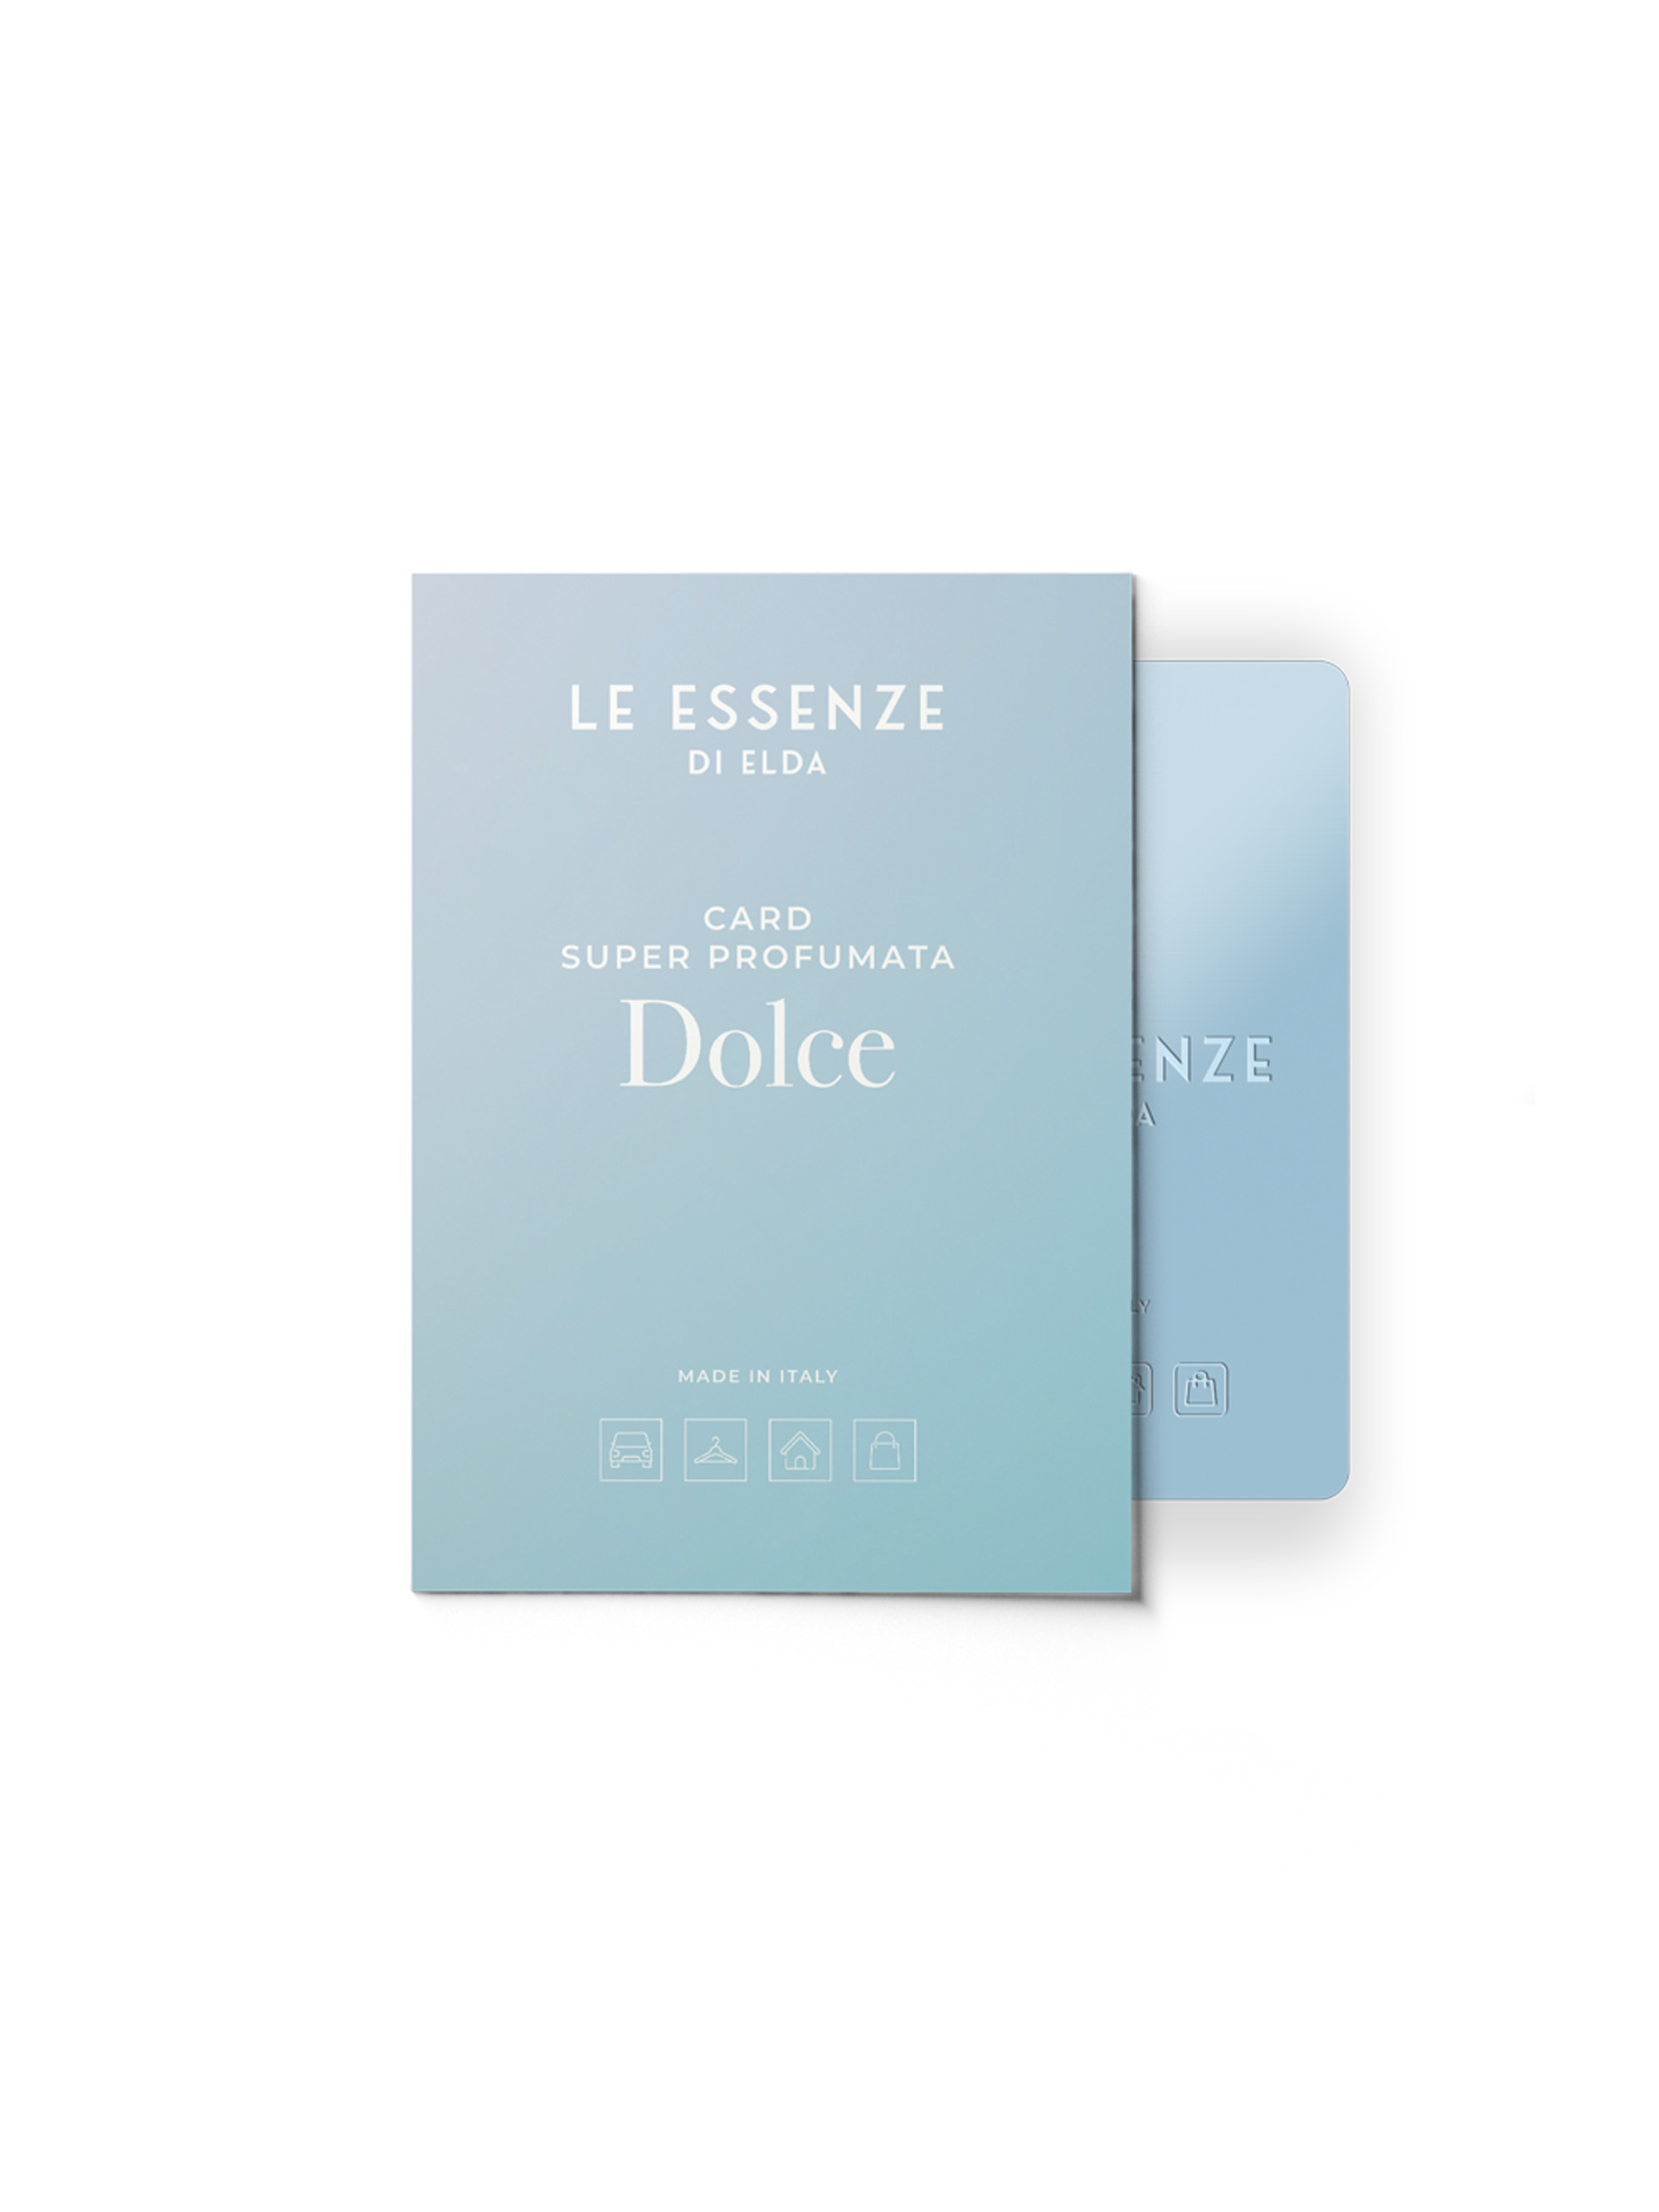 Super scented card Dolce